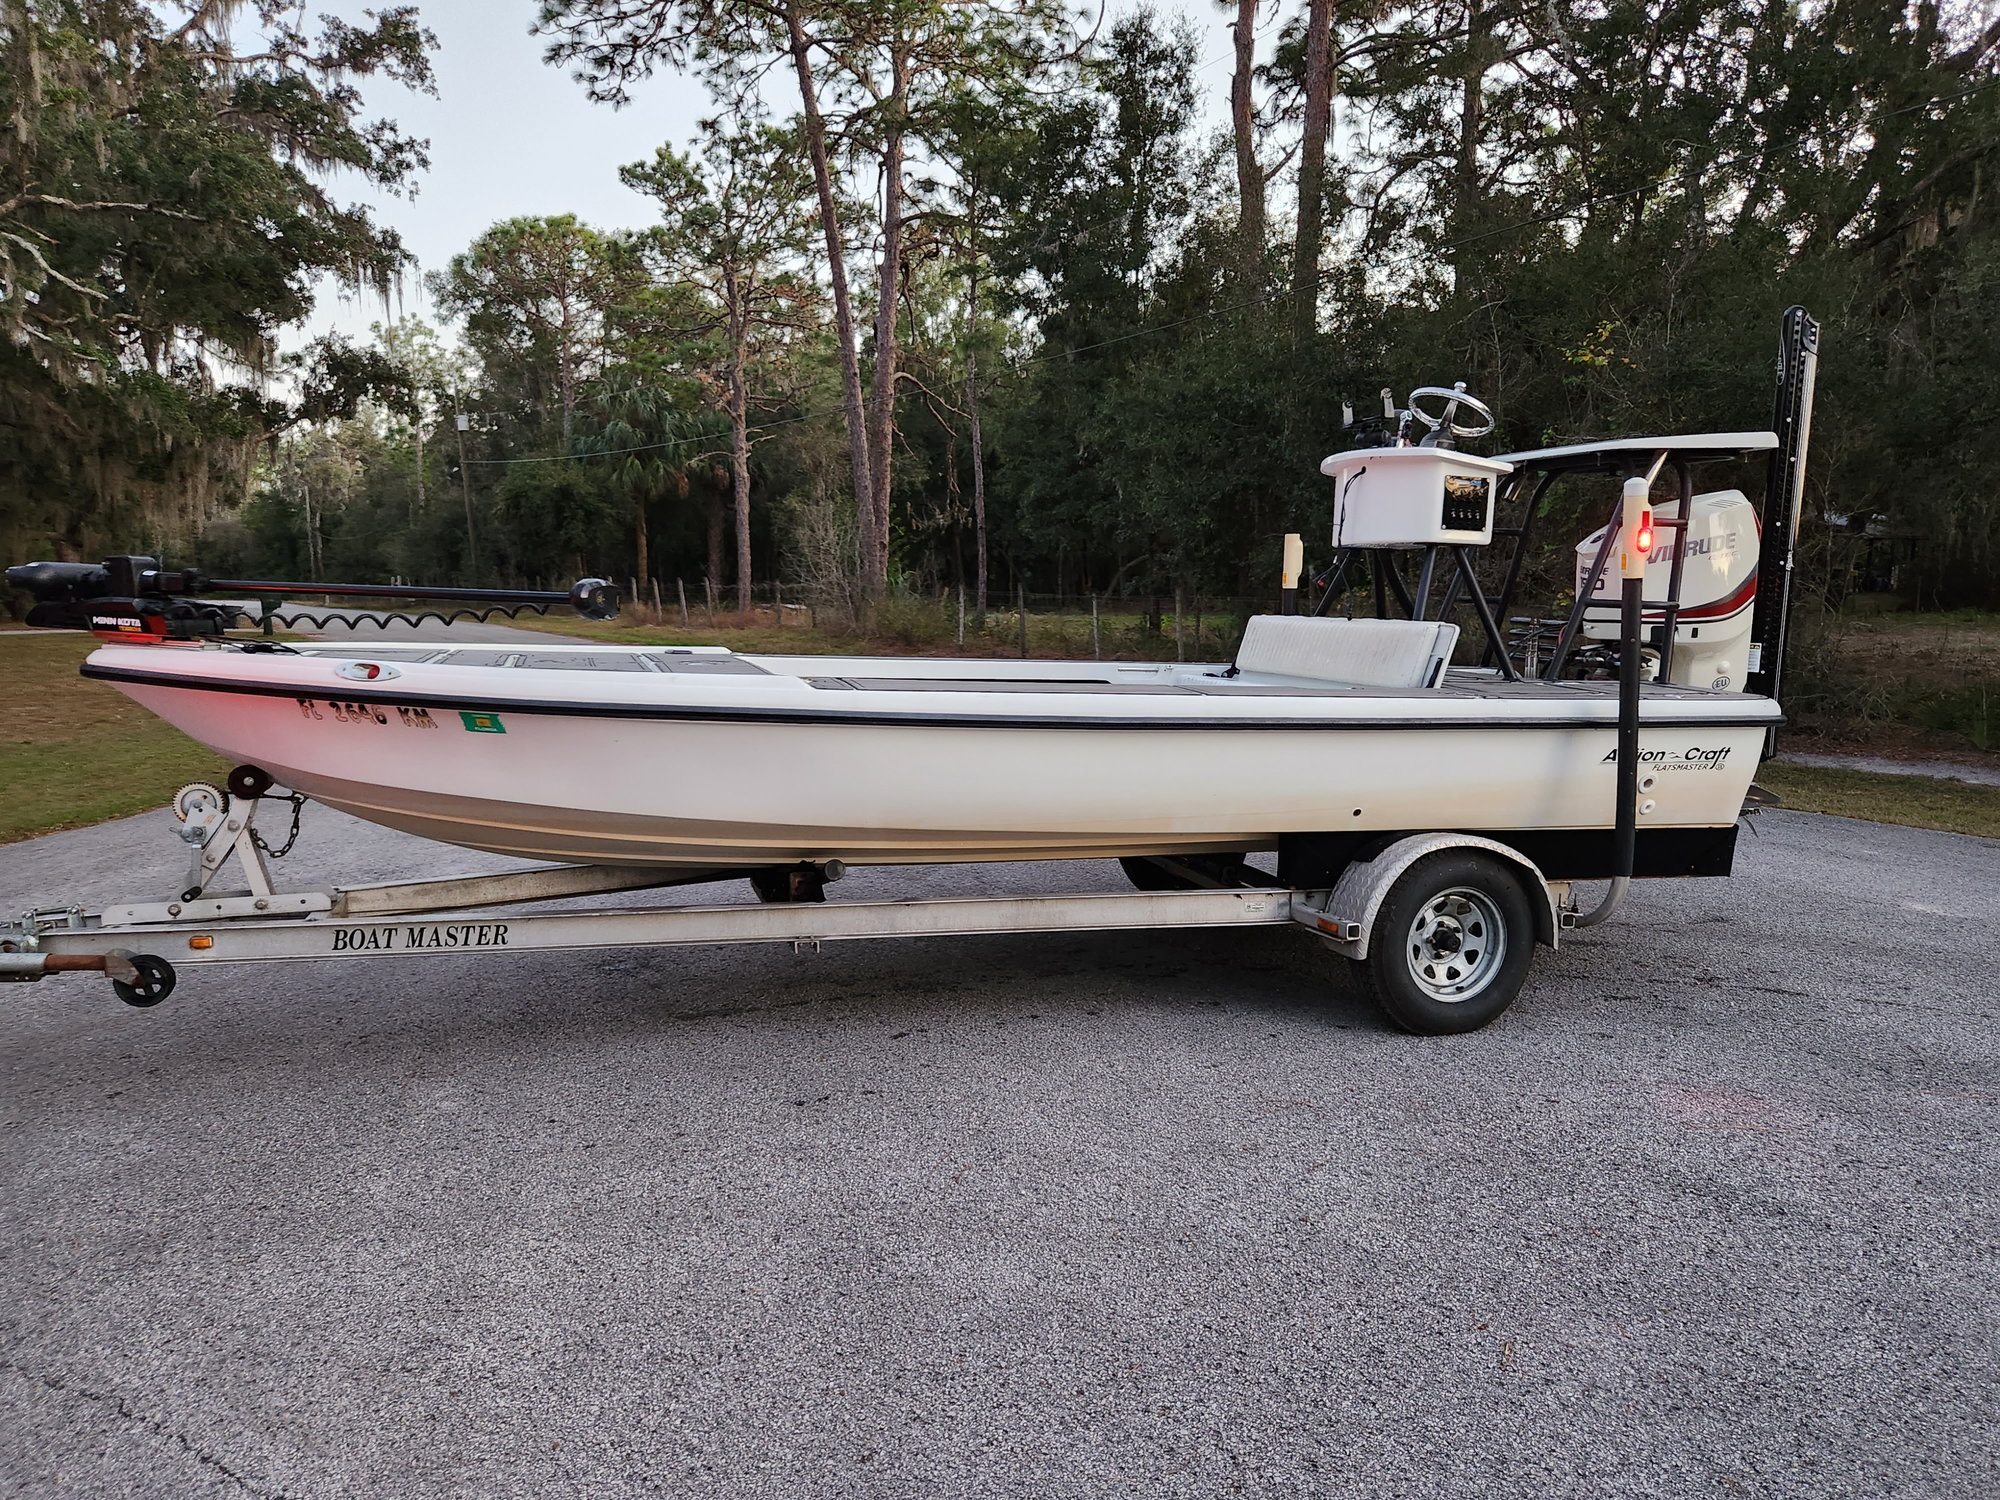 Action Craft 1820 Flatsmaster sell or trade - The Hull Truth